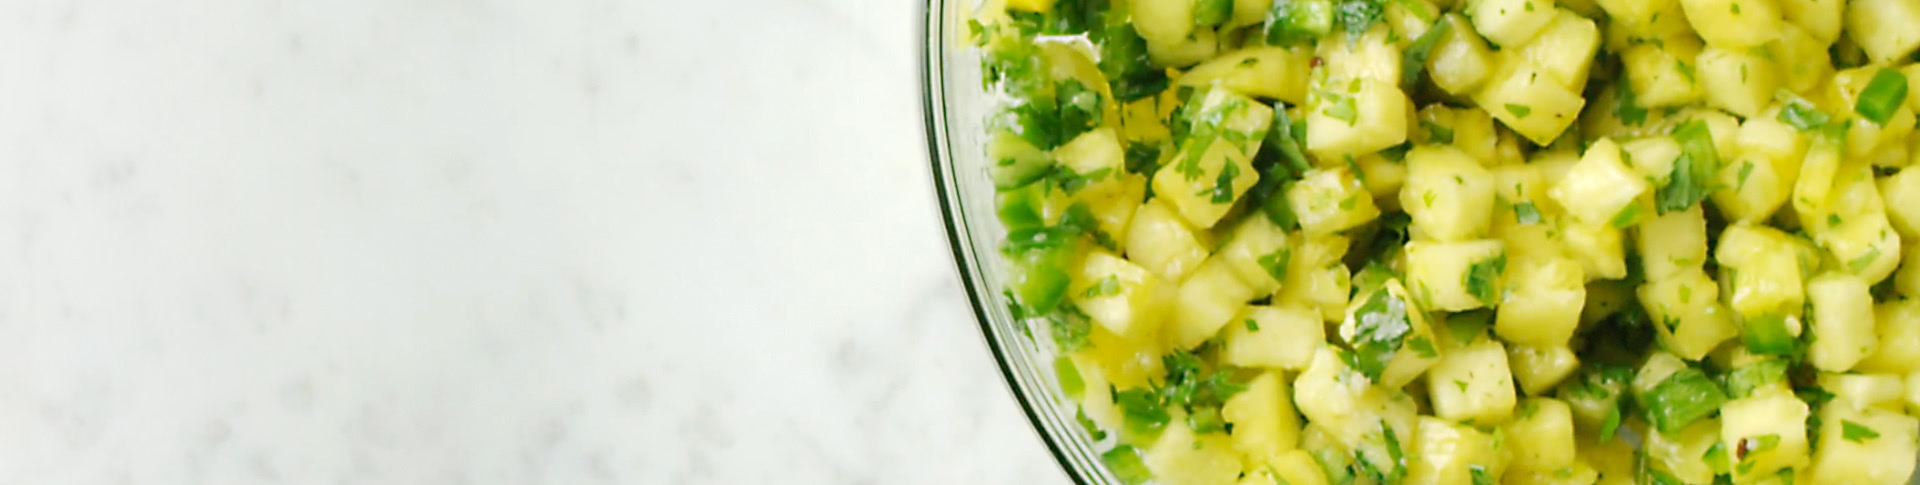 Pineapple Salsa with Spiced Tortilla Chips Recipe.